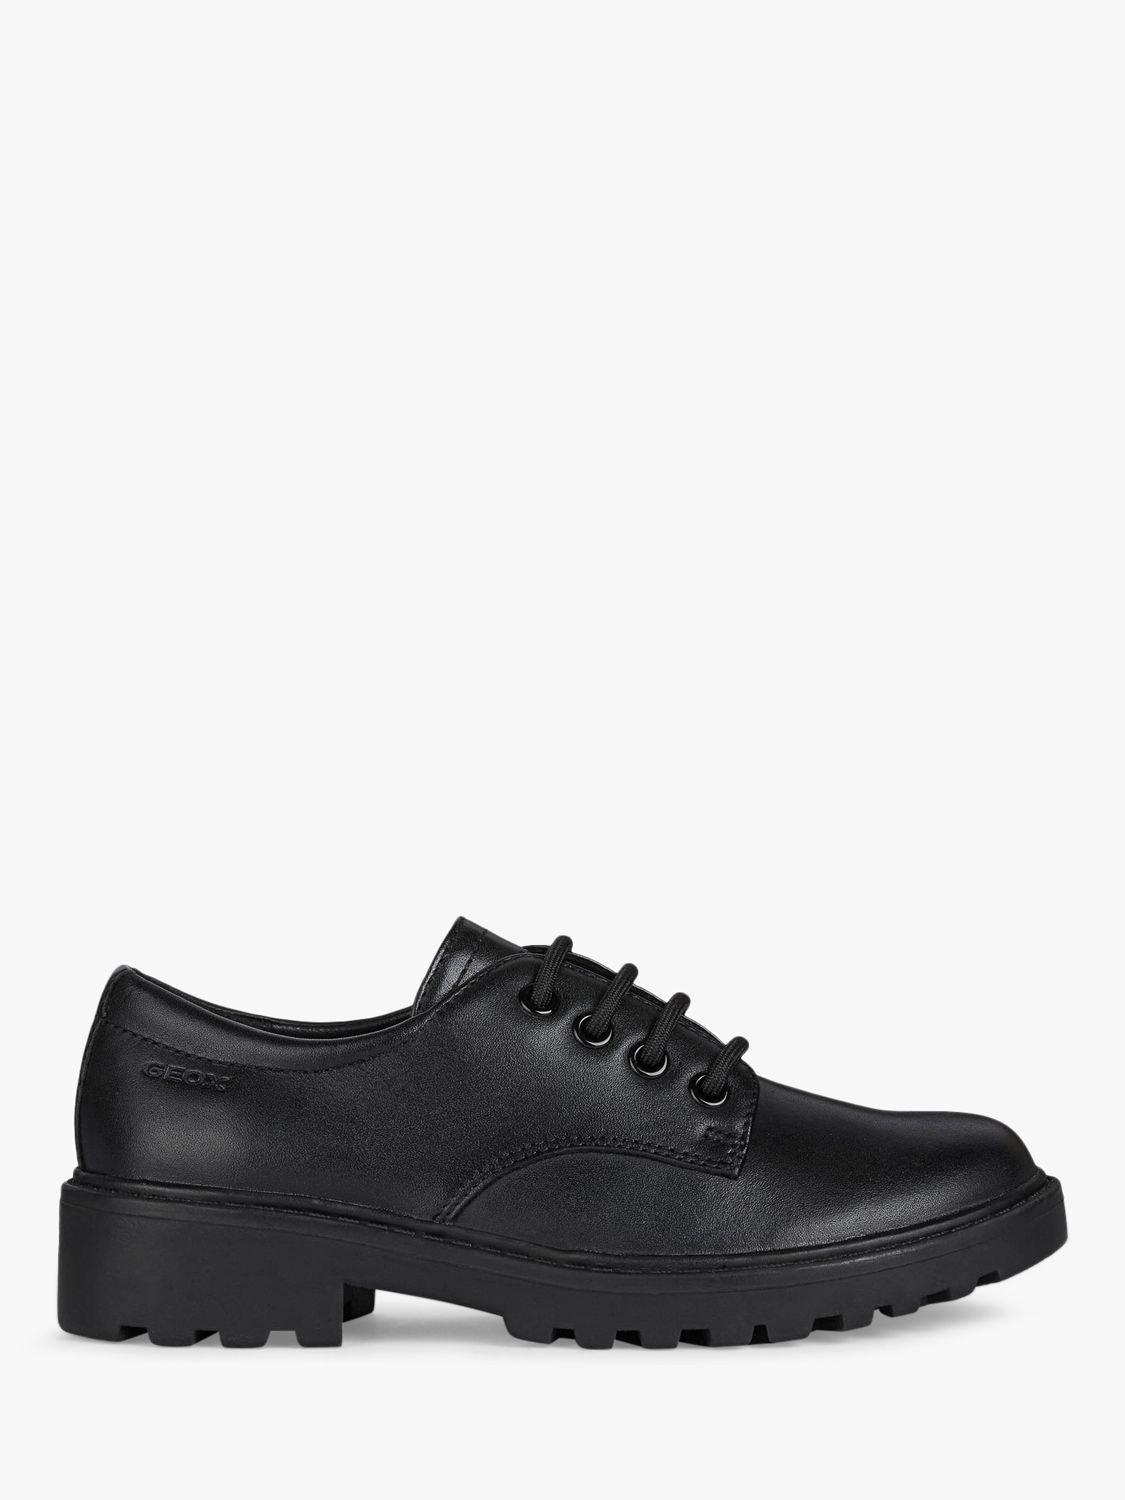 Geox Kids' Casey Lace Up School Shoes, Black at John Lewis & Partners